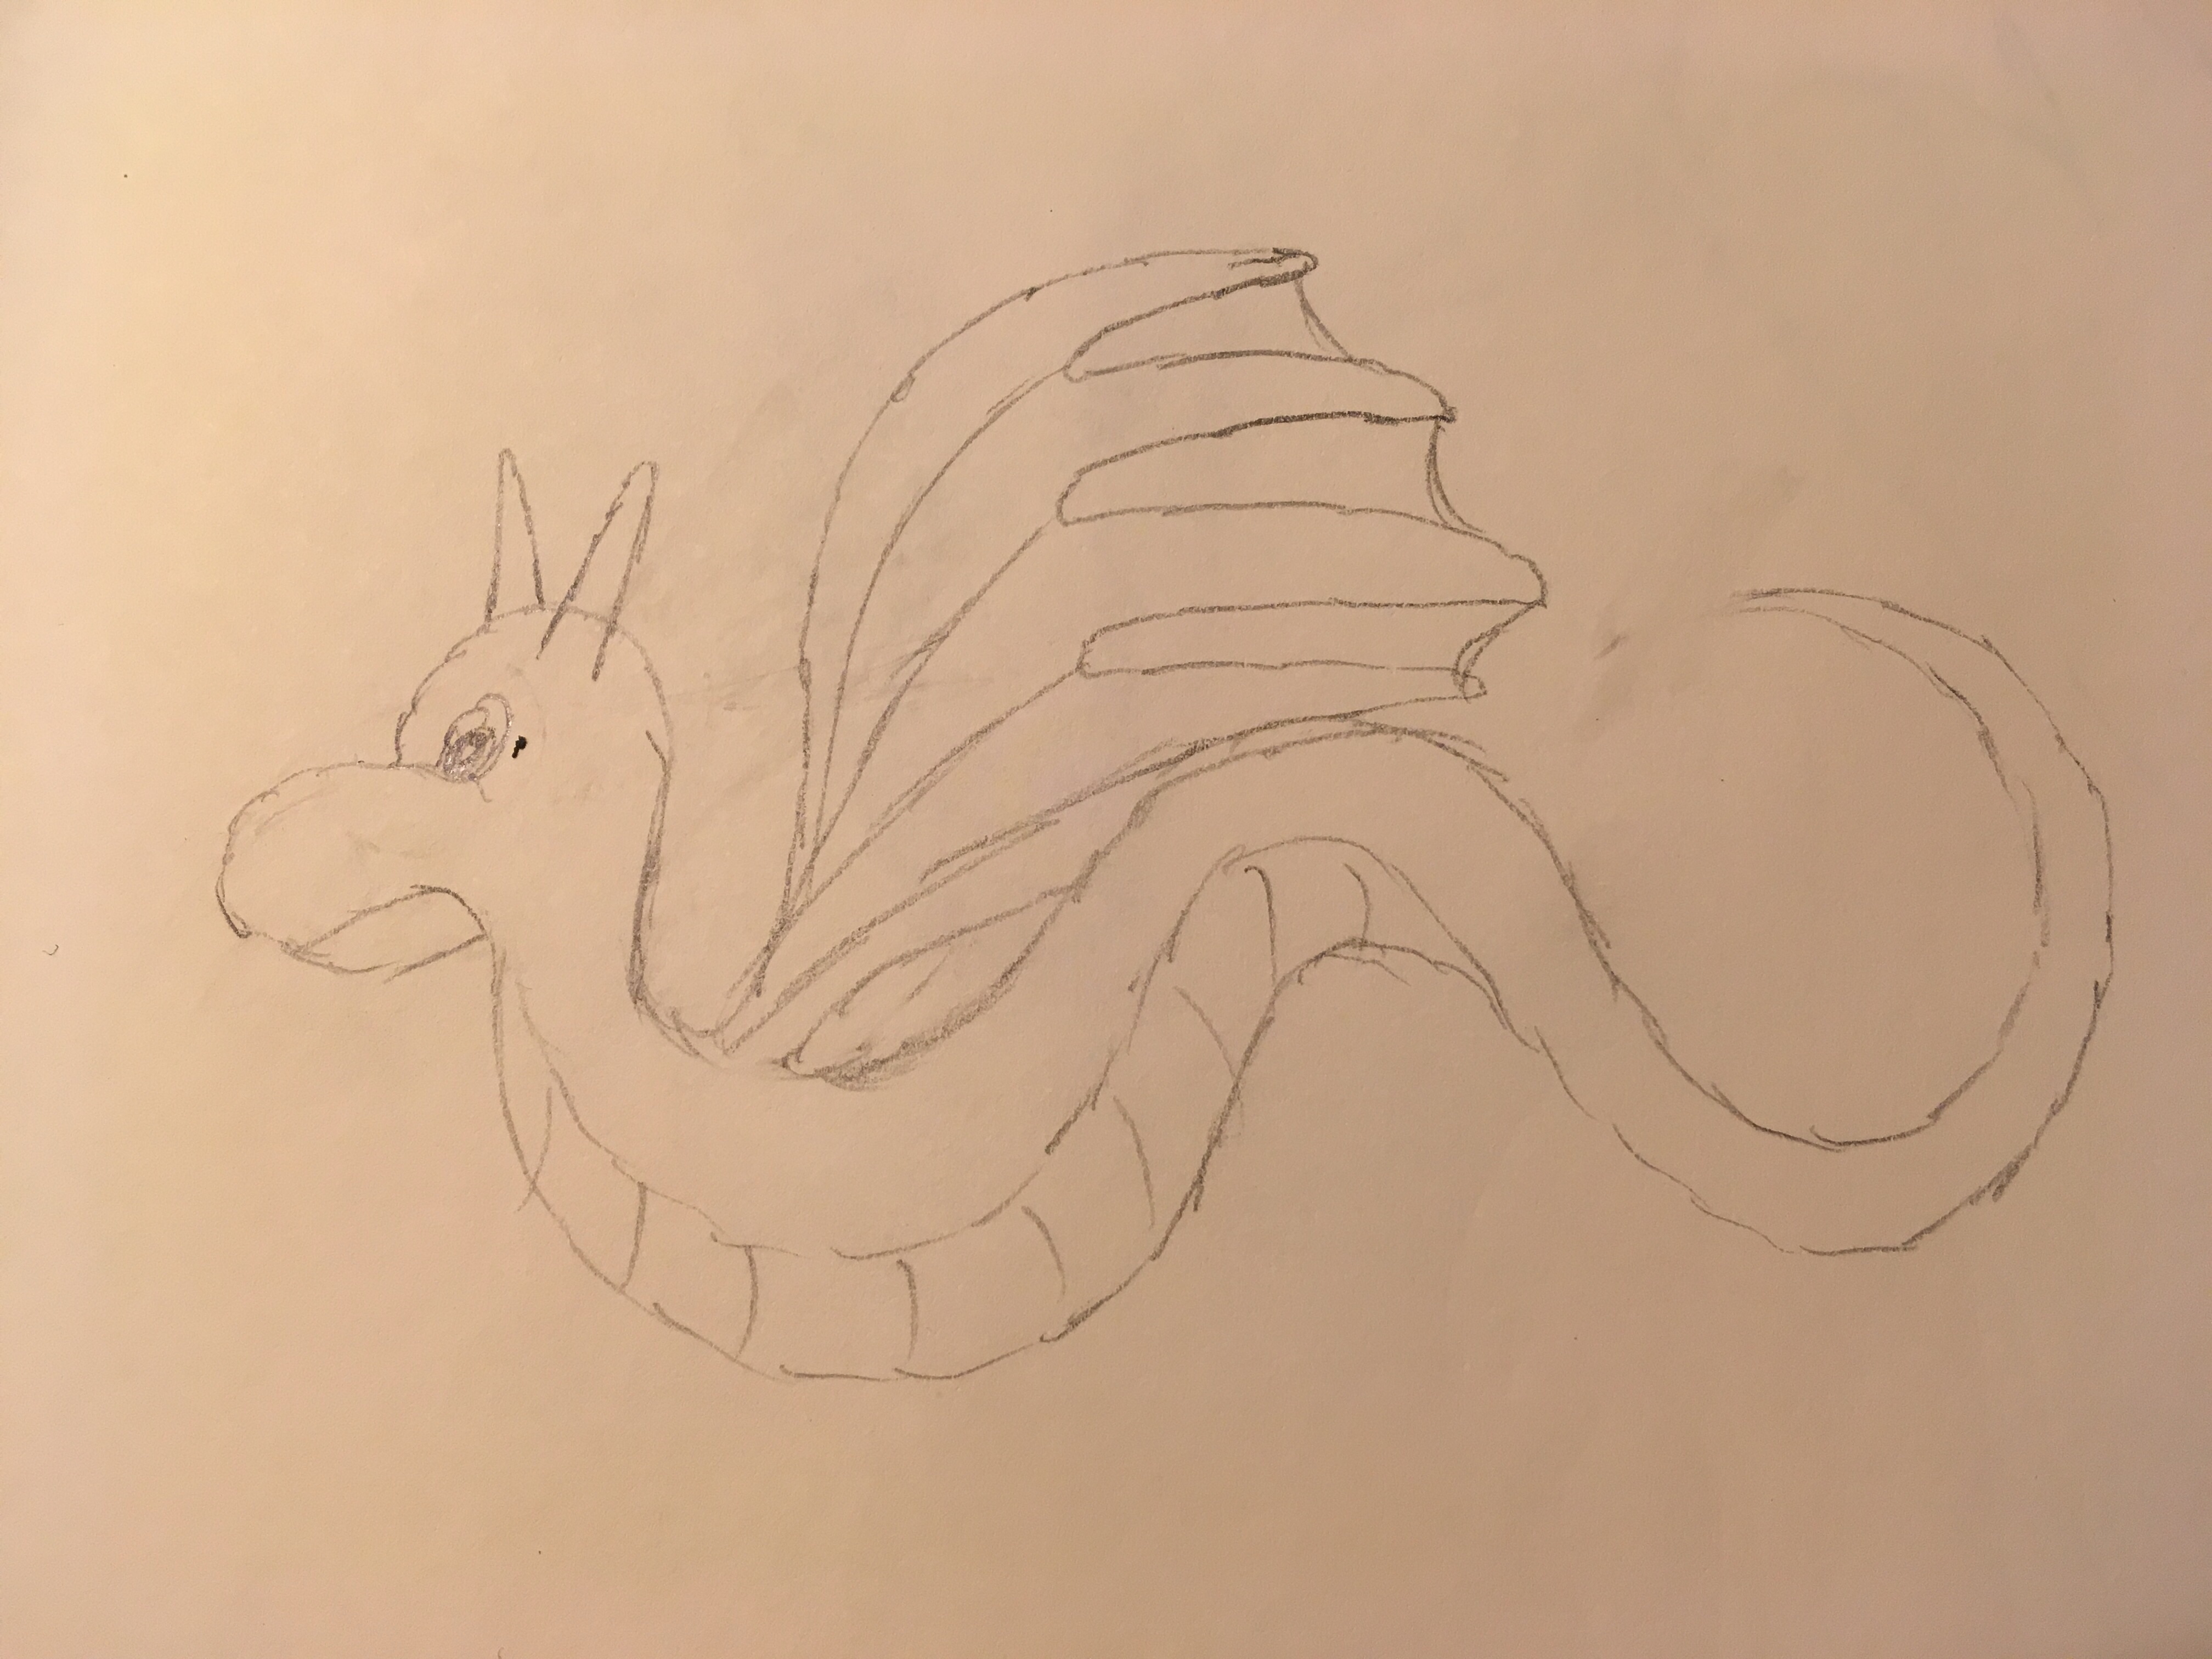 Dragon with awkward wings that I will probably erase